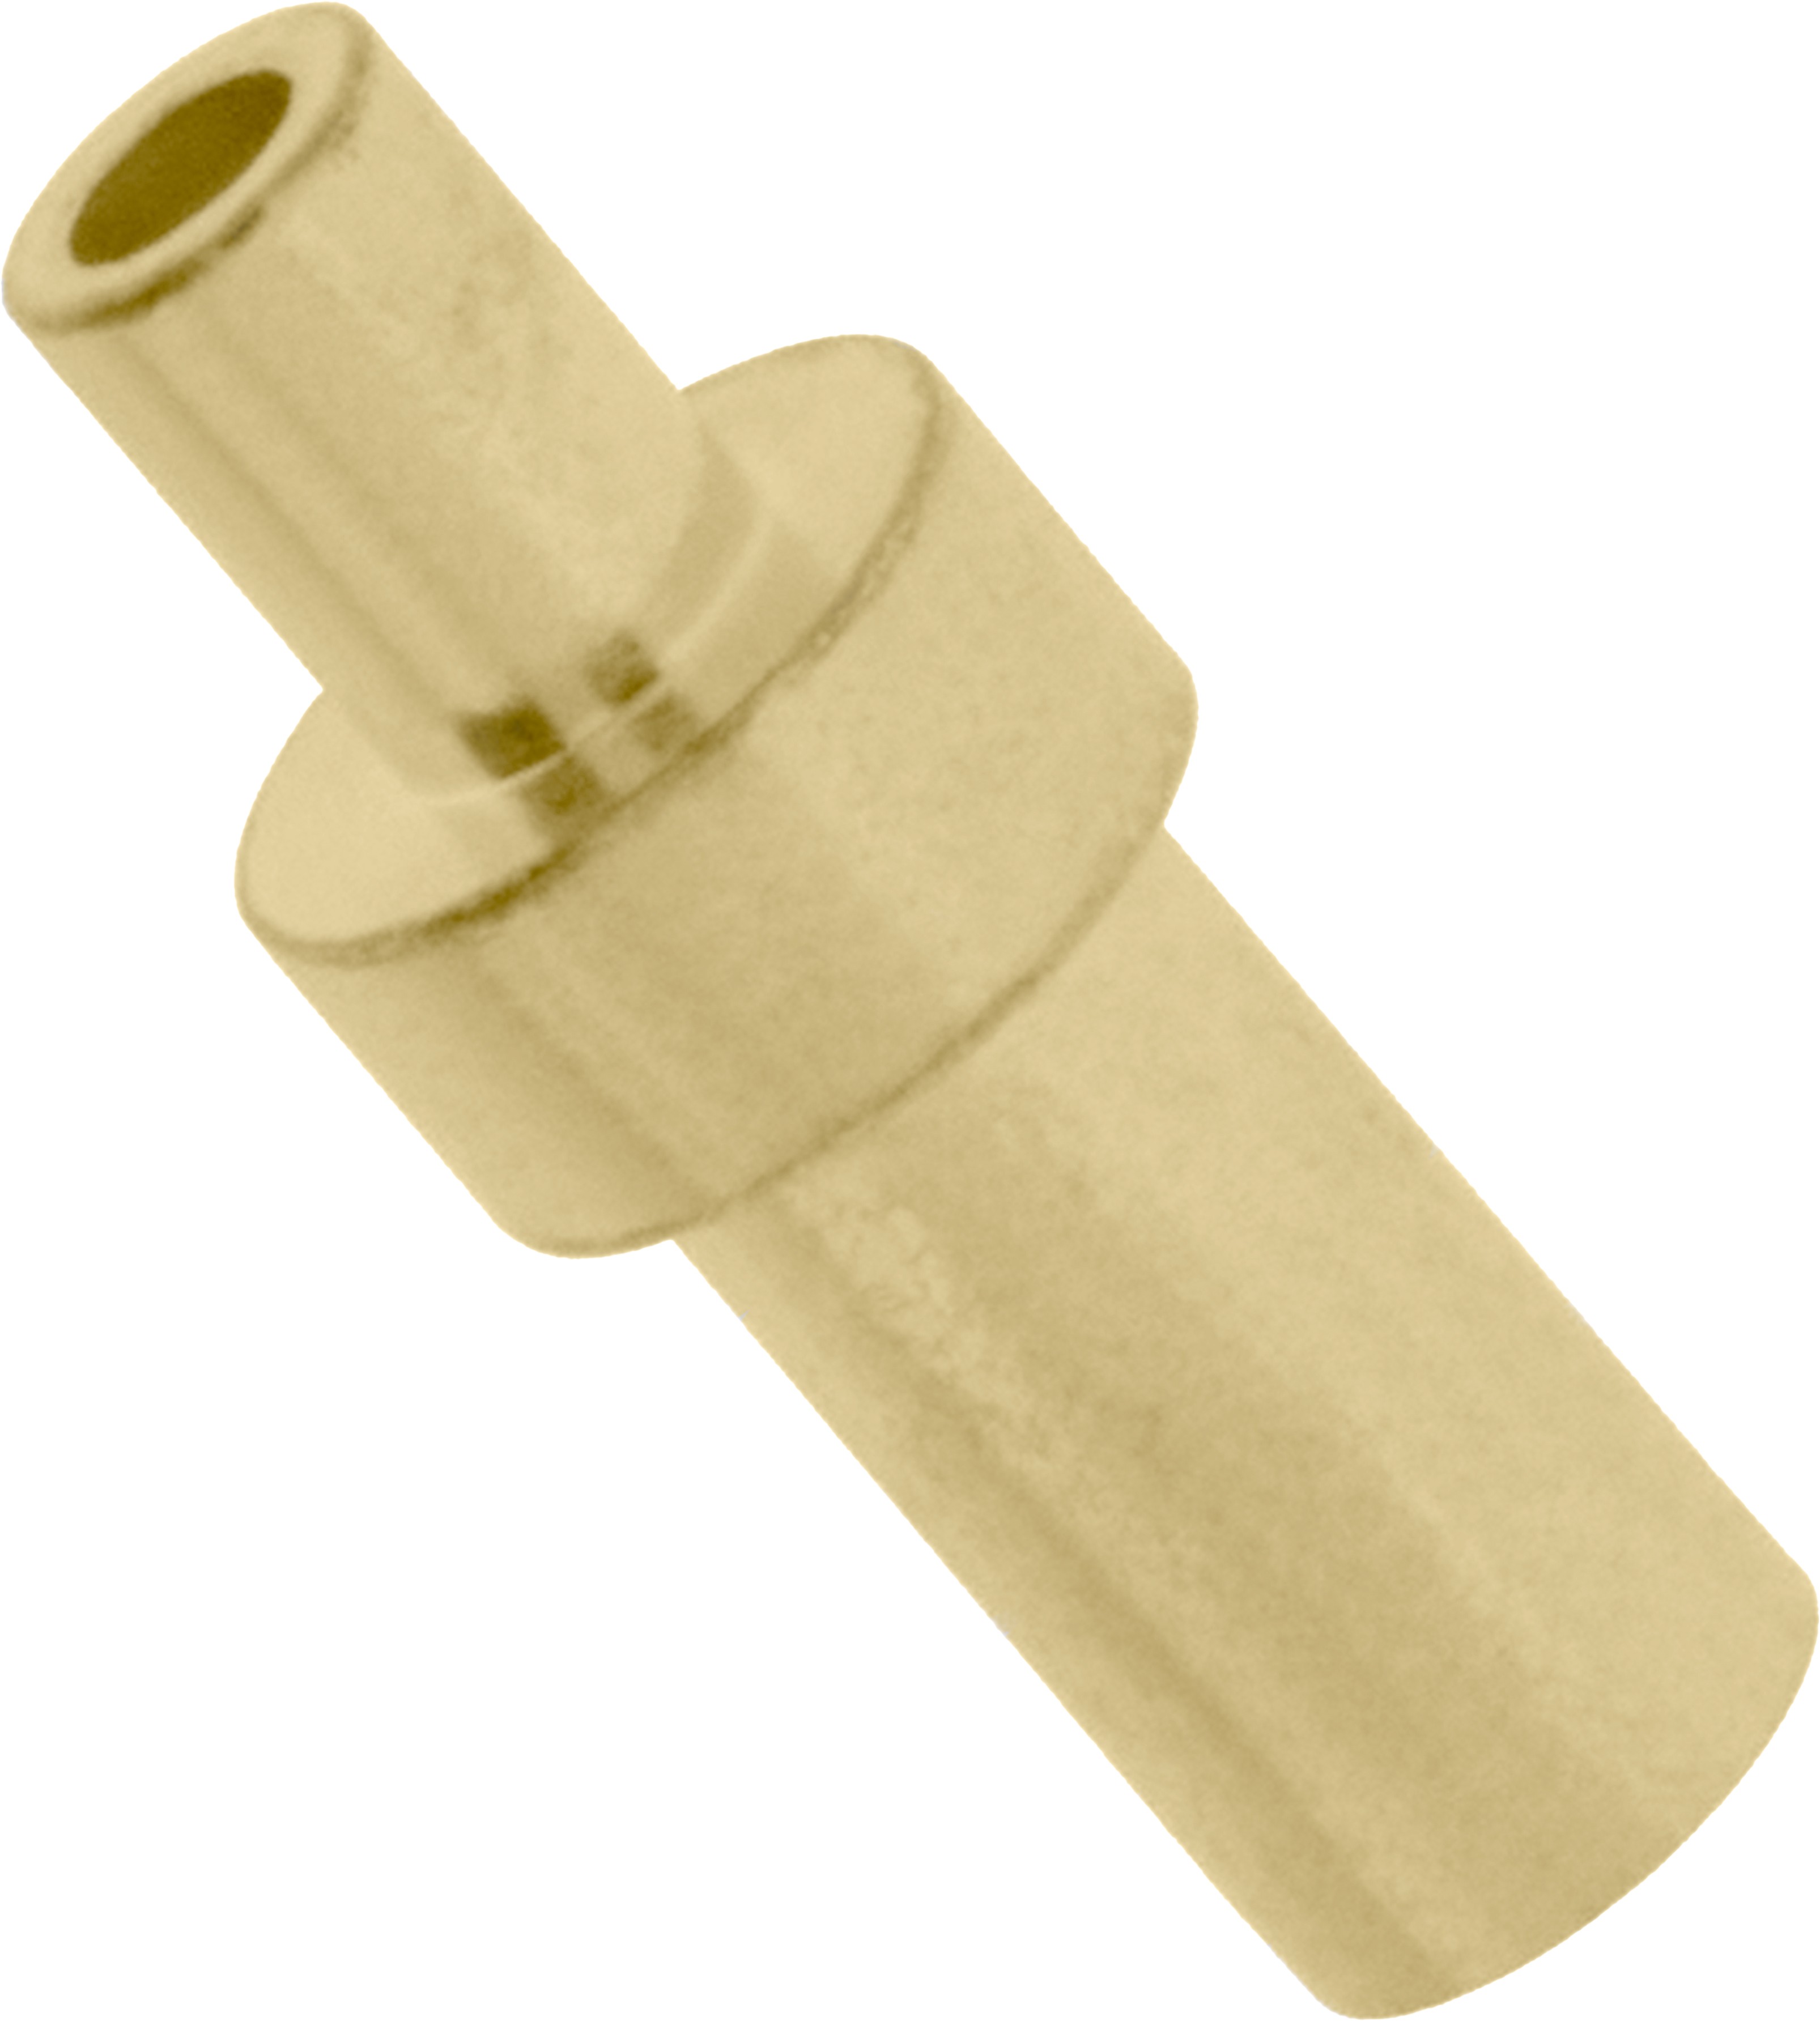 Female Socket For Pin API-2520 / SS2590 Gold-plated (Unit)